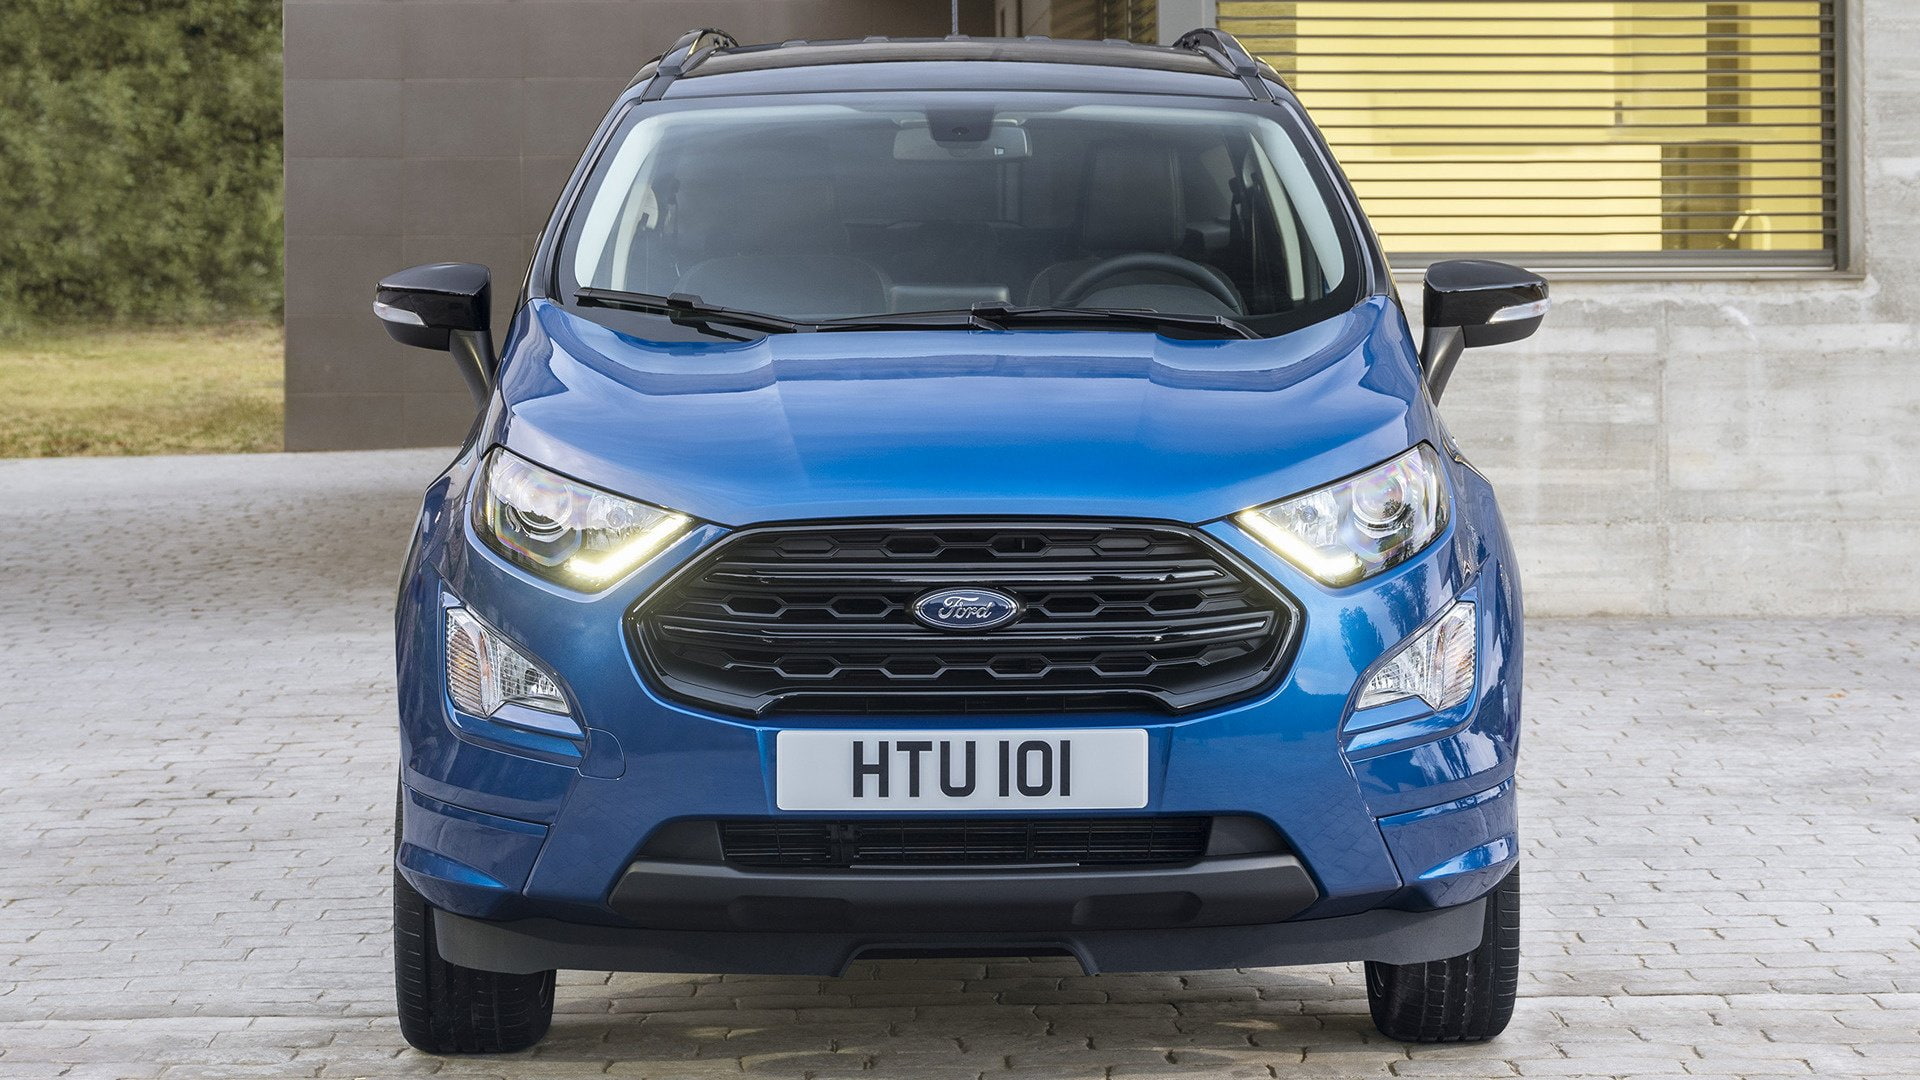 Ford, Ford EcoSport ST-Line, Blue Car, Crossover Car, SUV, Subcompact Car